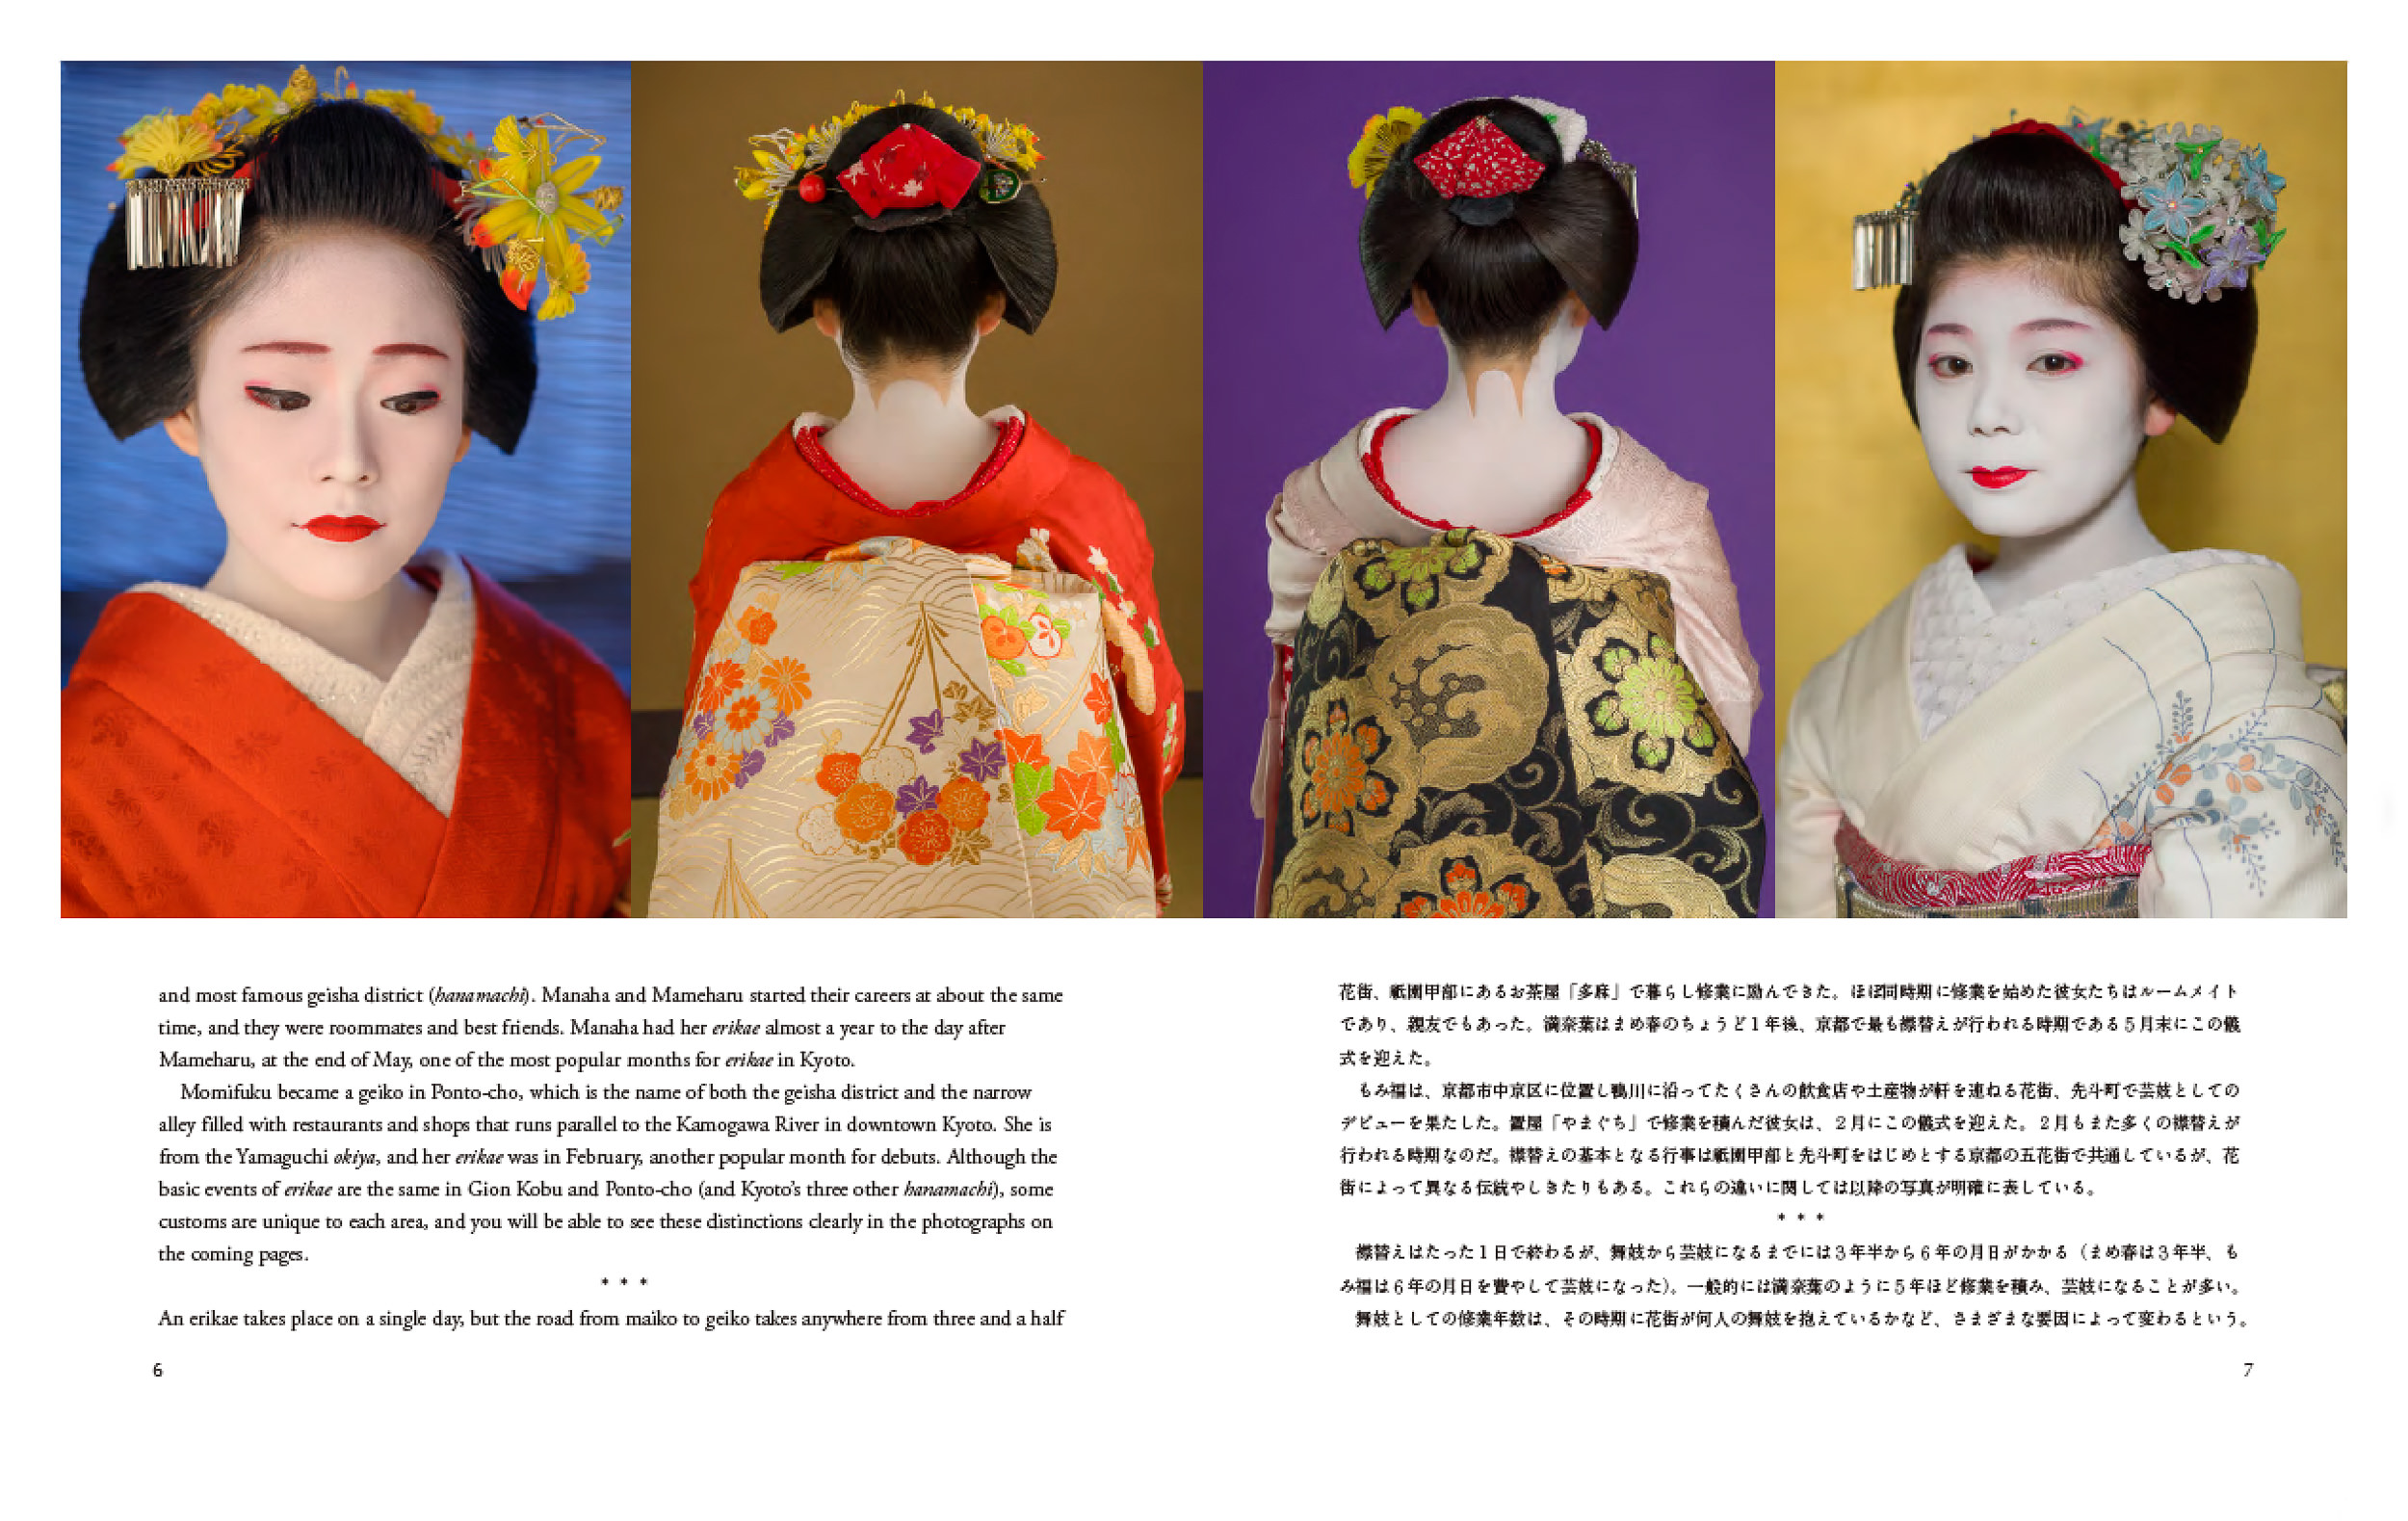 Now-a-Geisha-pages-6-7.jpg